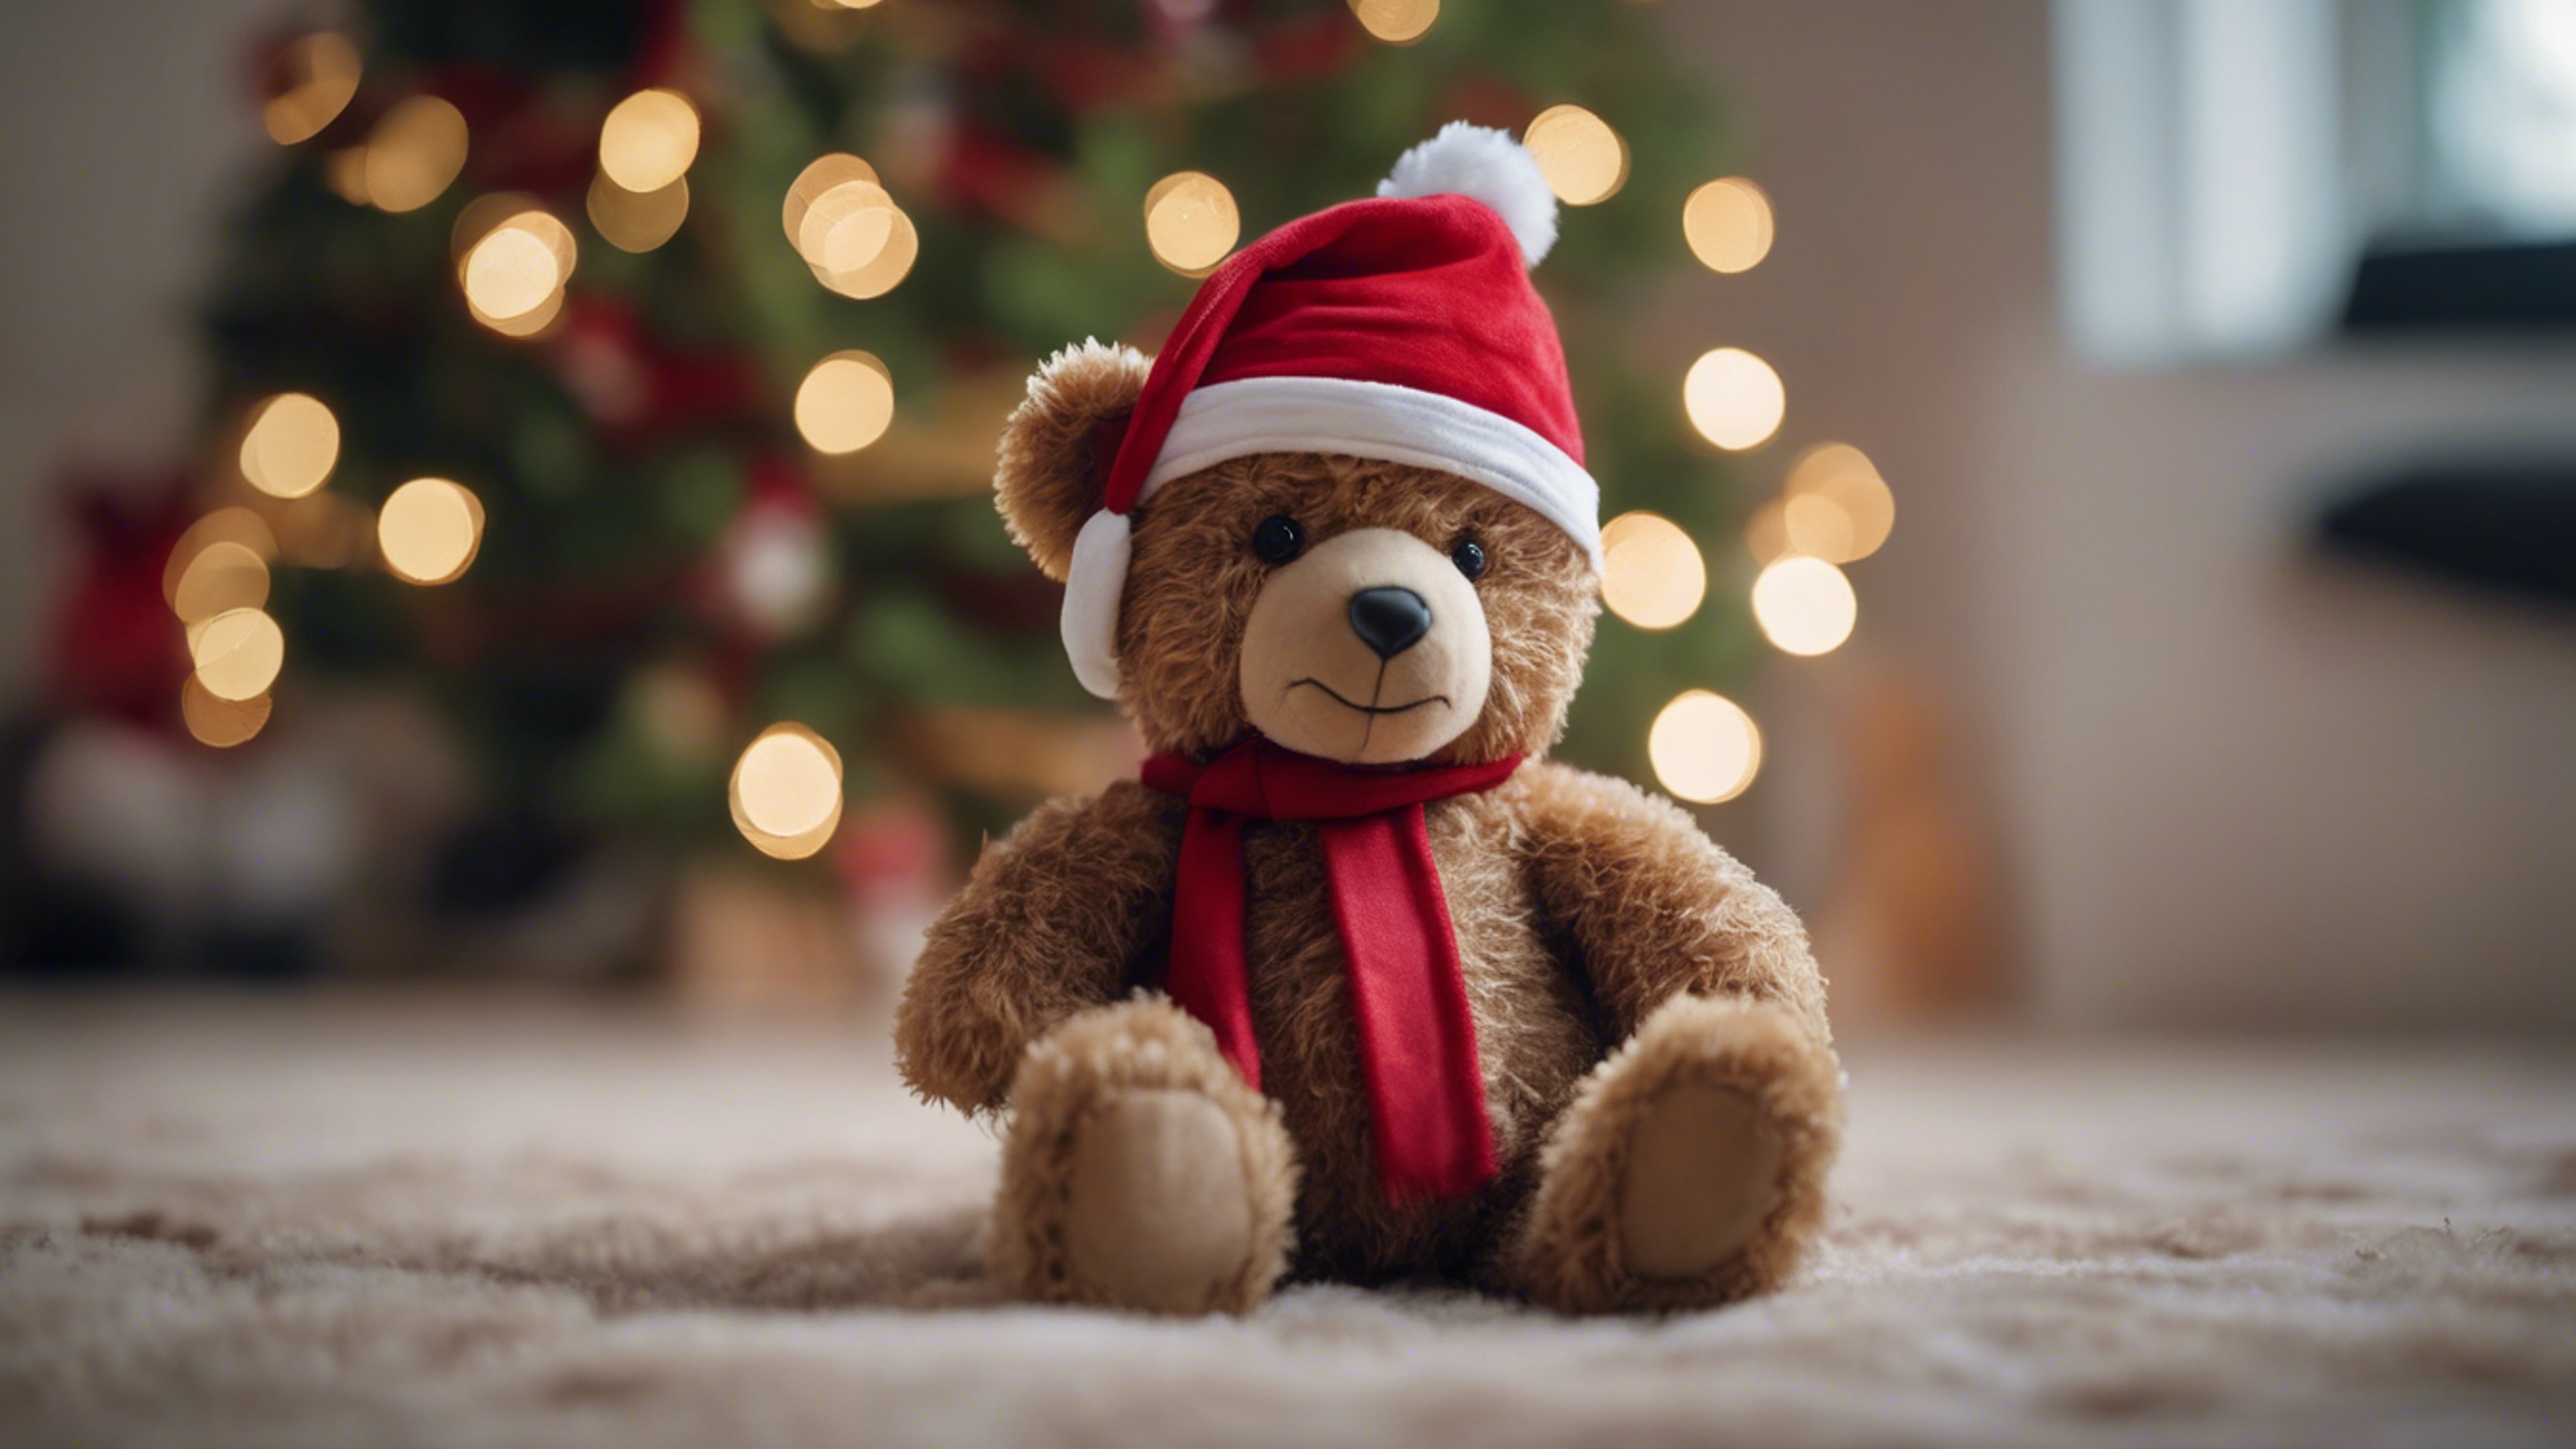 A teddy bear wearing a red Christmas hat, sitting next to a Christmas tree. Hintergrund[764052ee6d604b67a698]